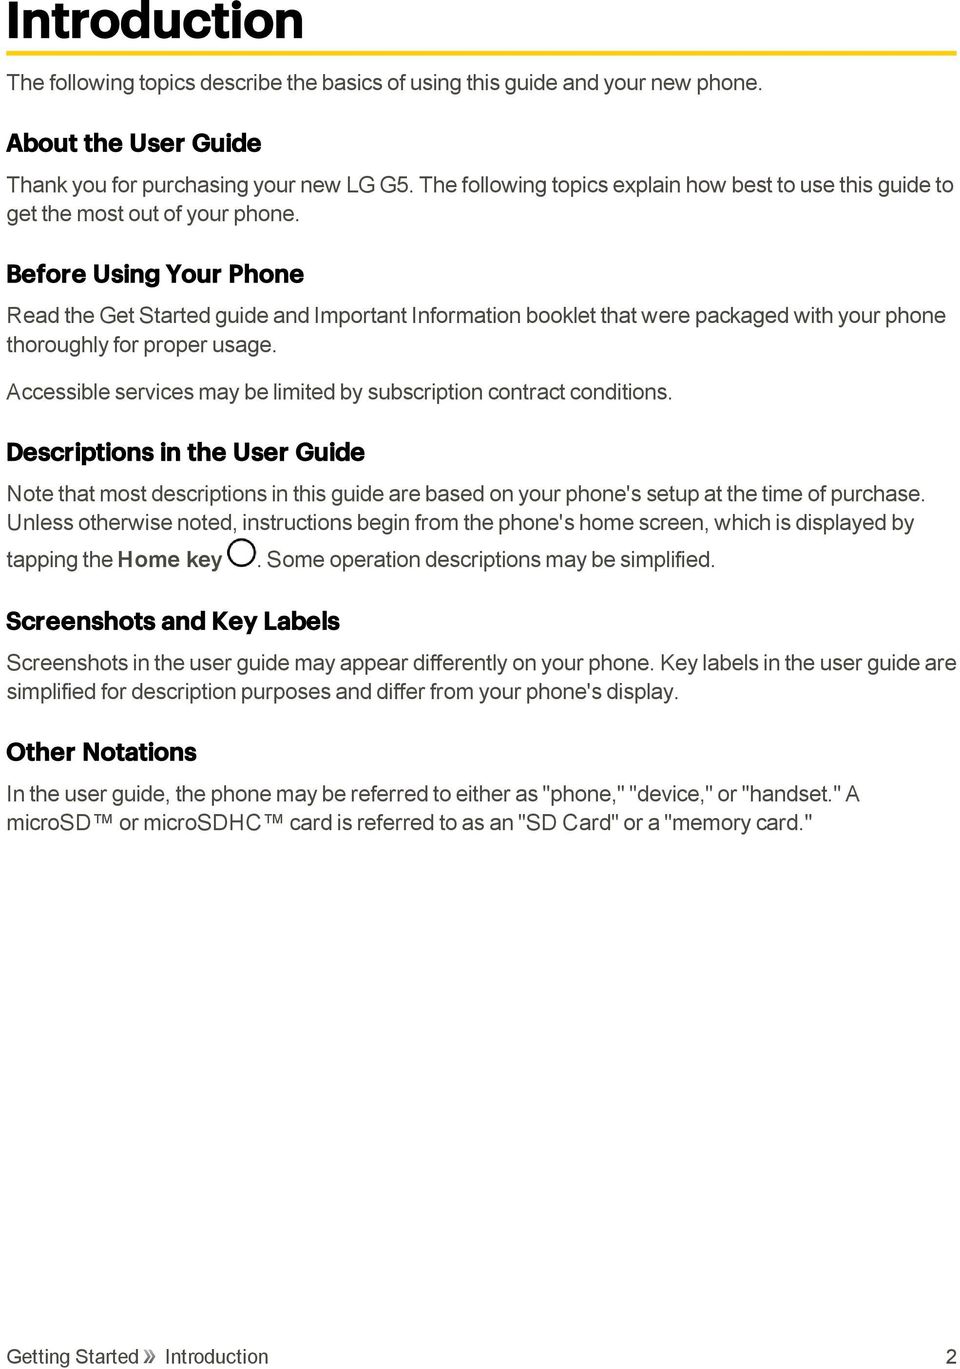 Before Using Your Phone Read the Get Started guide and Important Information booklet that were packaged with your phone thoroughly for proper usage.